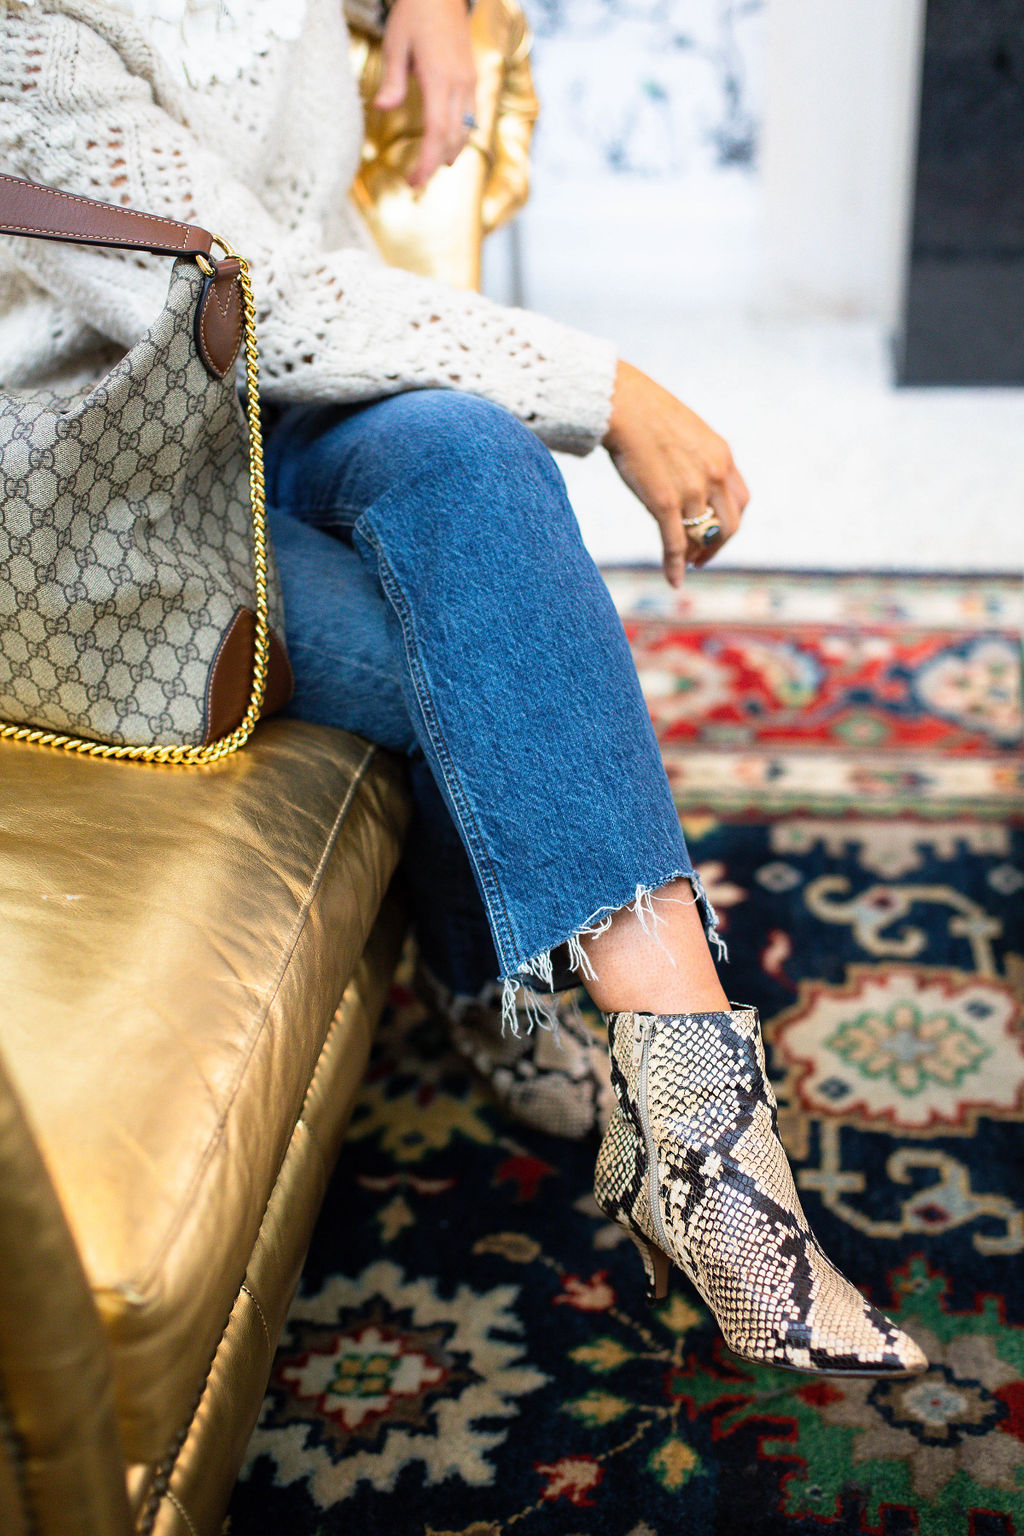 How to Wear Edgy Booties with Jeans Murfreesboro Stylist Jenny Grubb Snakeskin Booties and Raw Hem Jeans Look